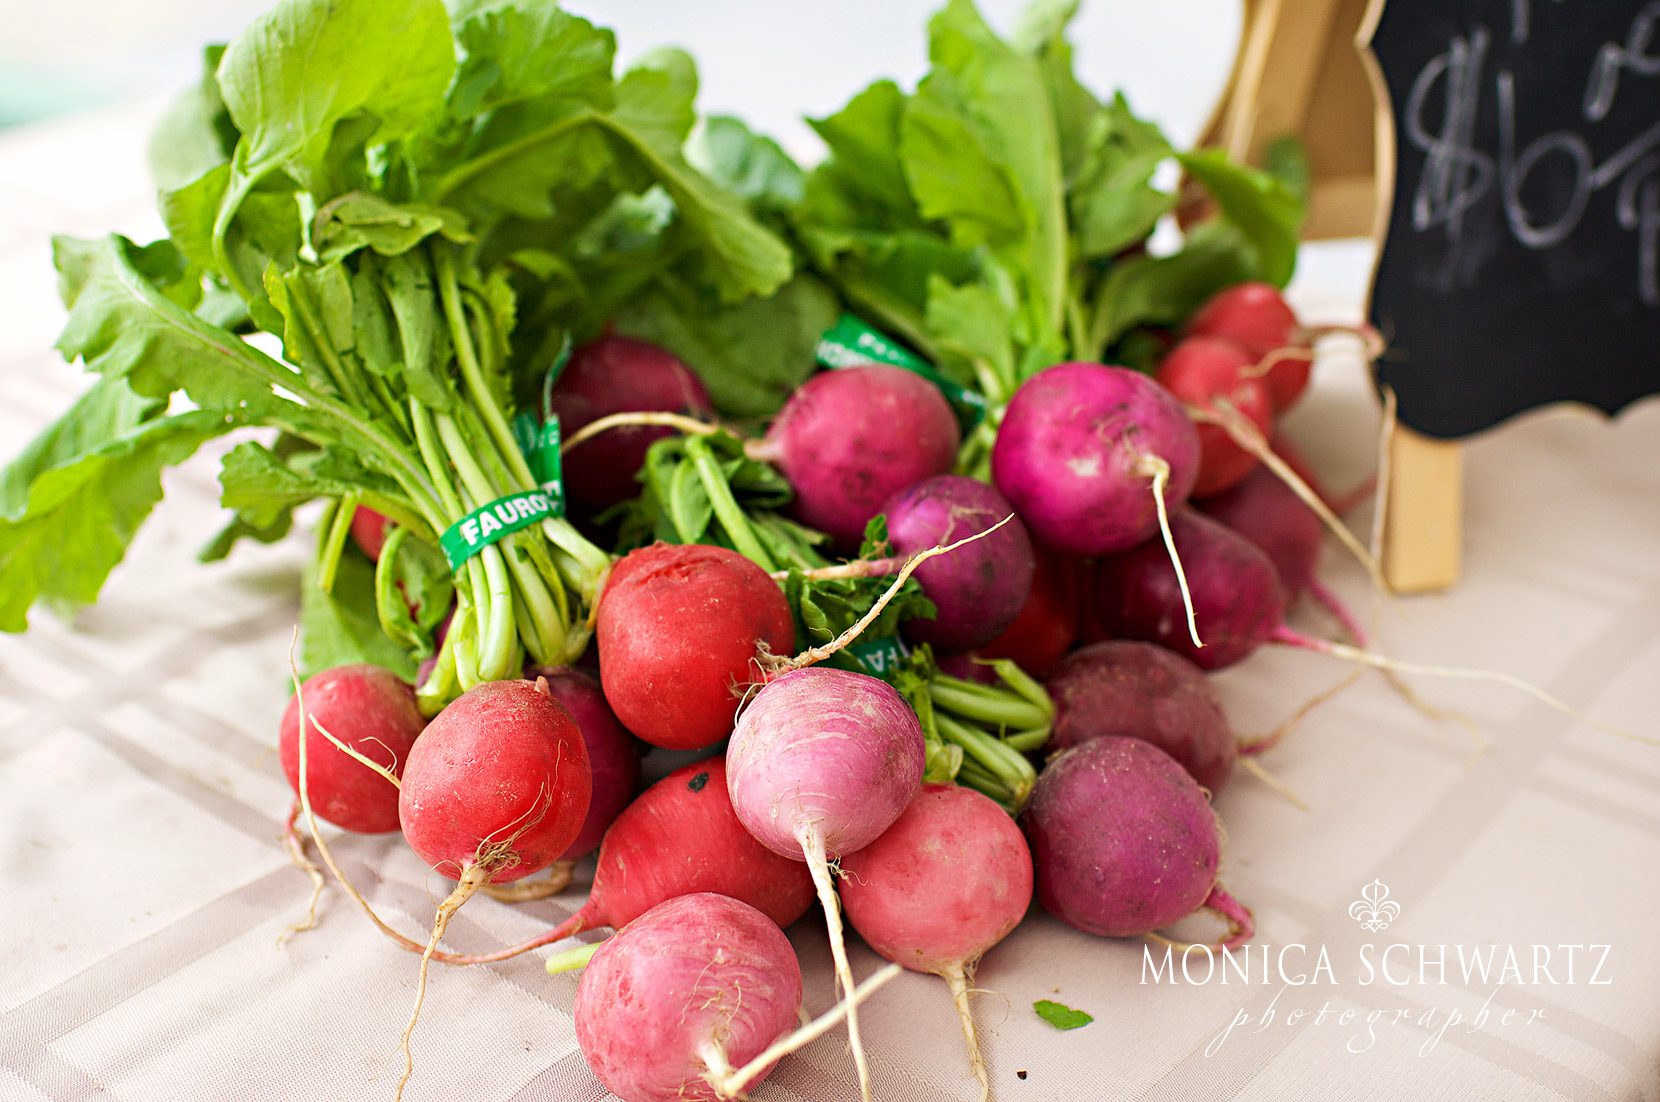 Easter-Radishes-at-the-Farmers-Market-in-Carmel-by-the-Sea-California